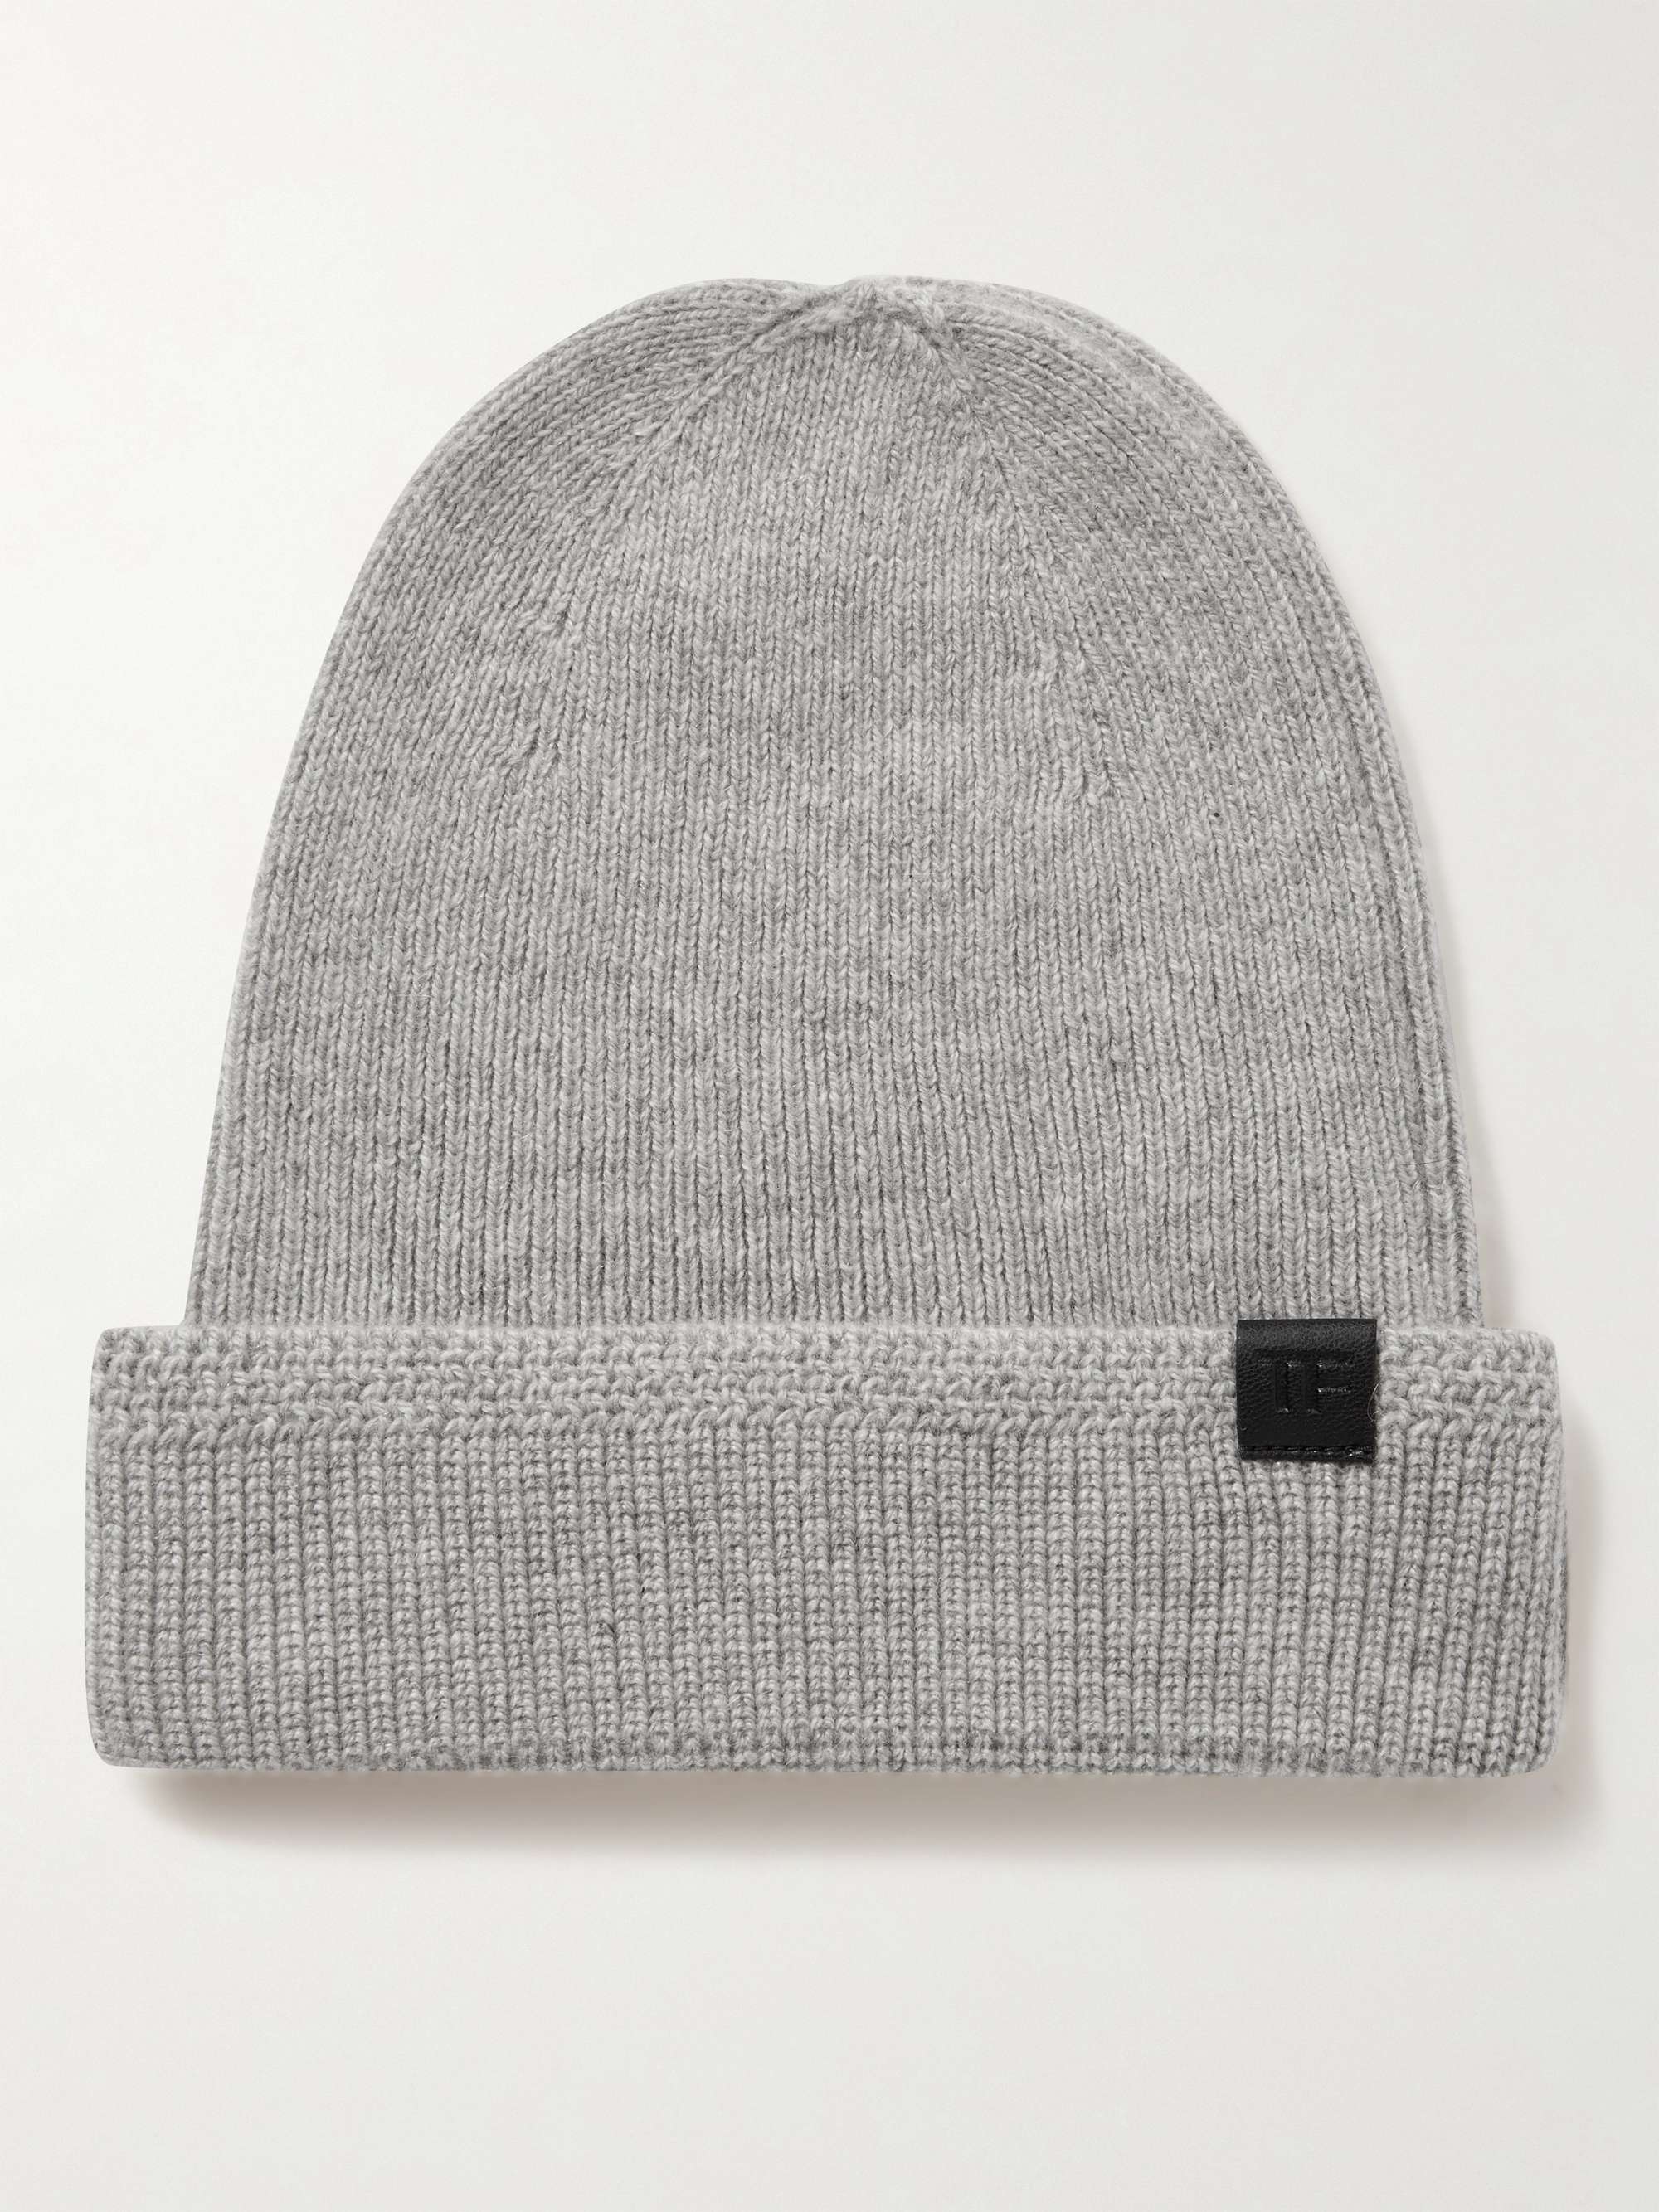 TOM FORD Leather-Trimmed Ribbed Cashmere Beanie